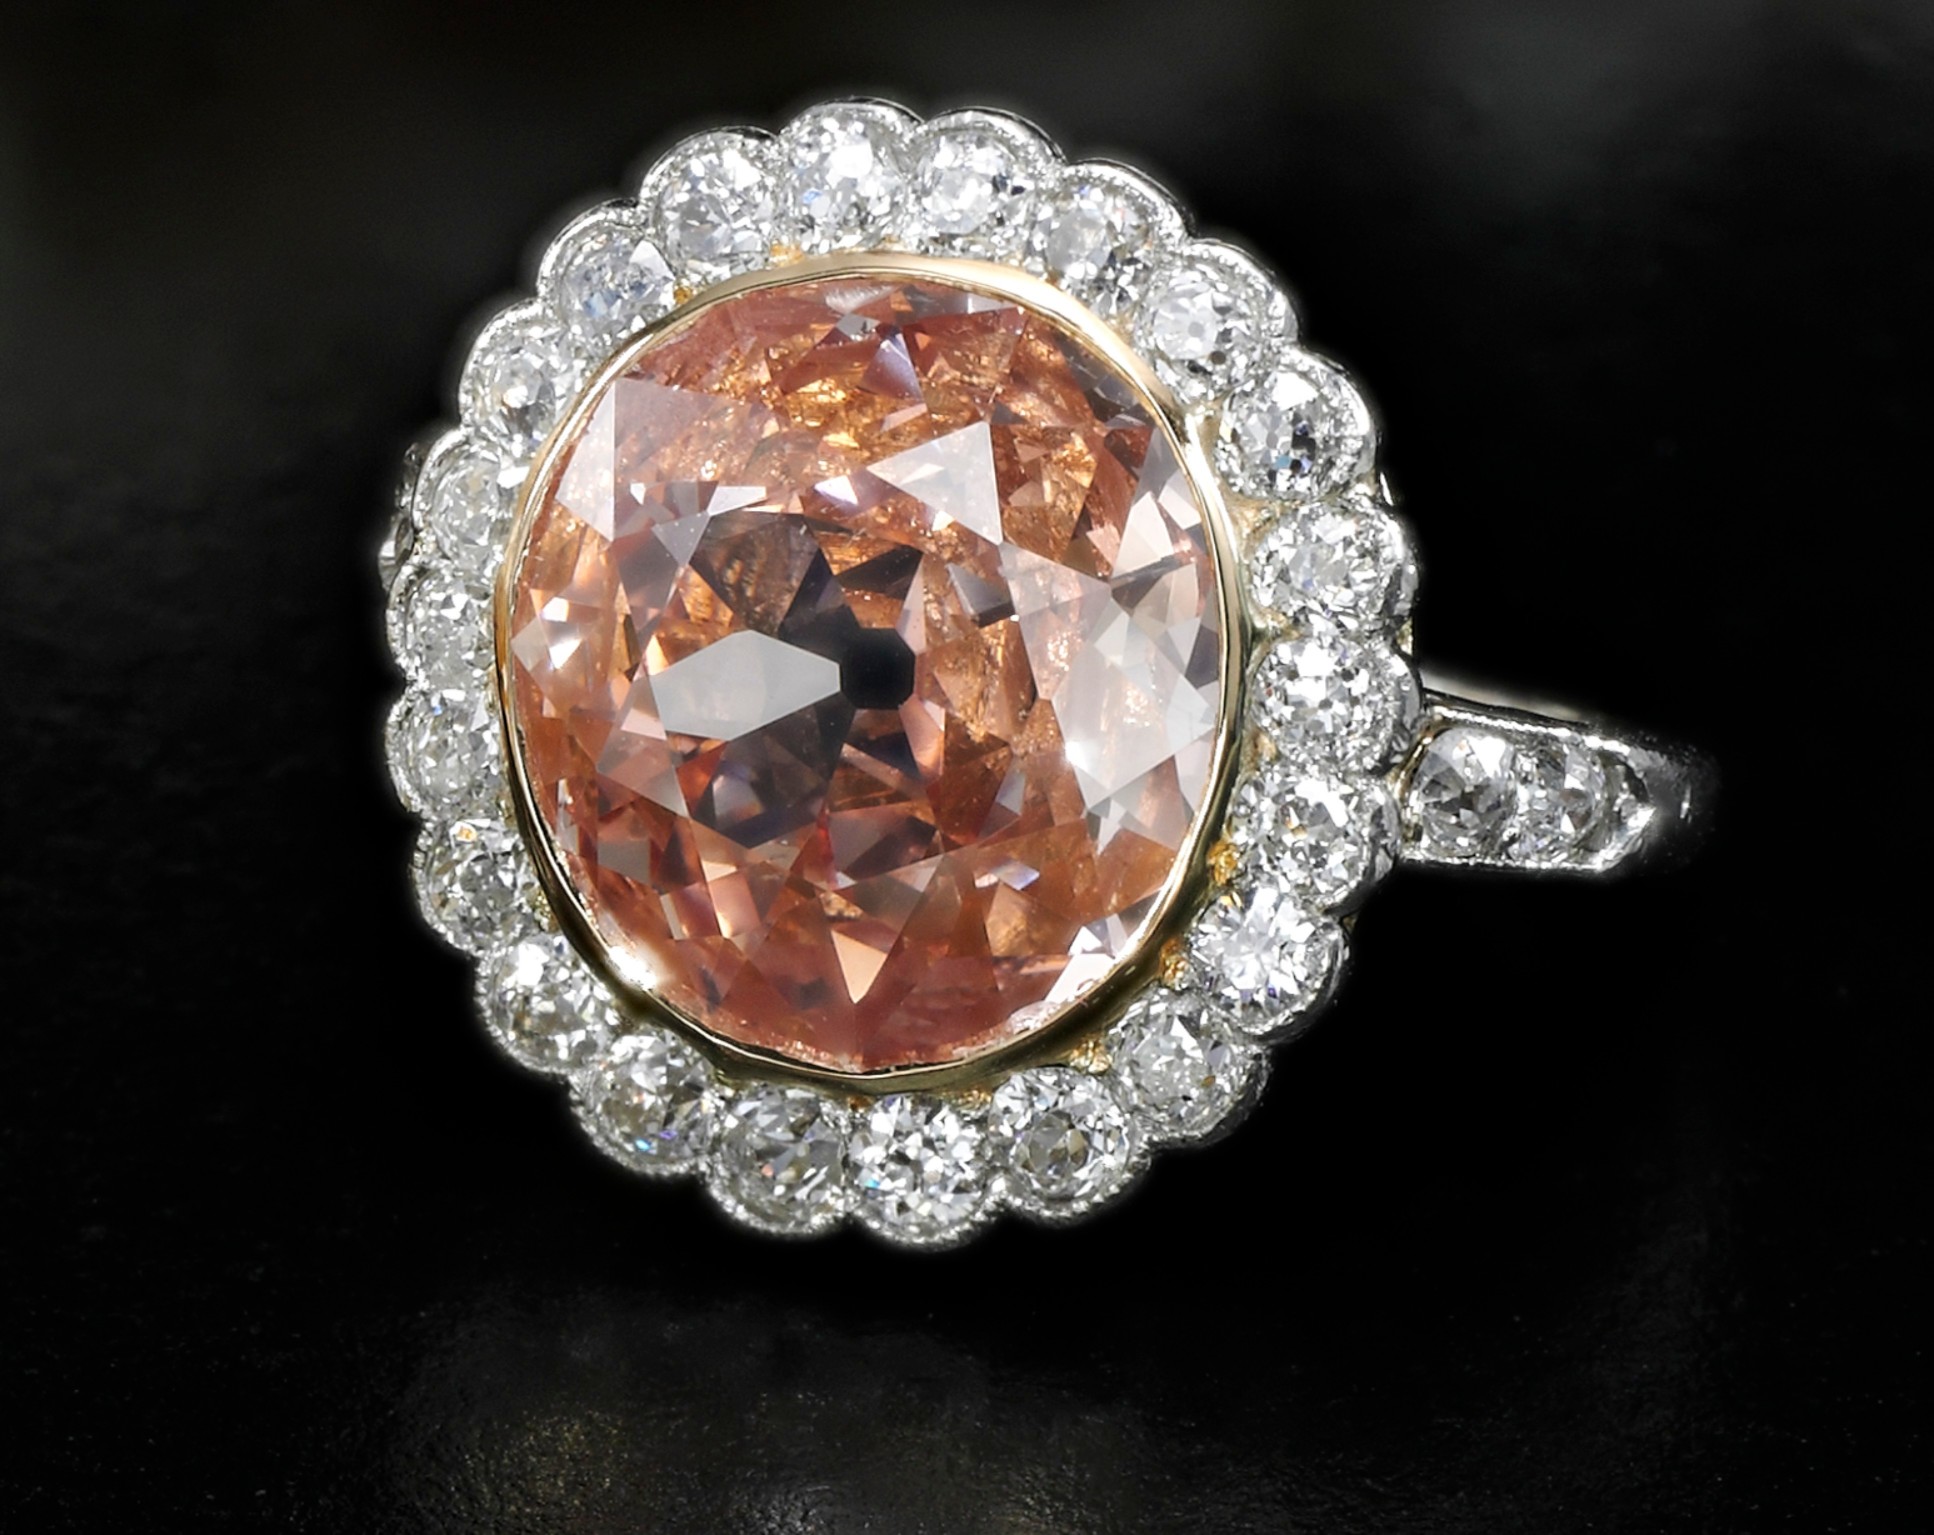 Impressive fancy orangy pink diamond ring - on black - Royal Jewels from the Bourbon Parma Family - Sotheby's 14 November 2018.jpg